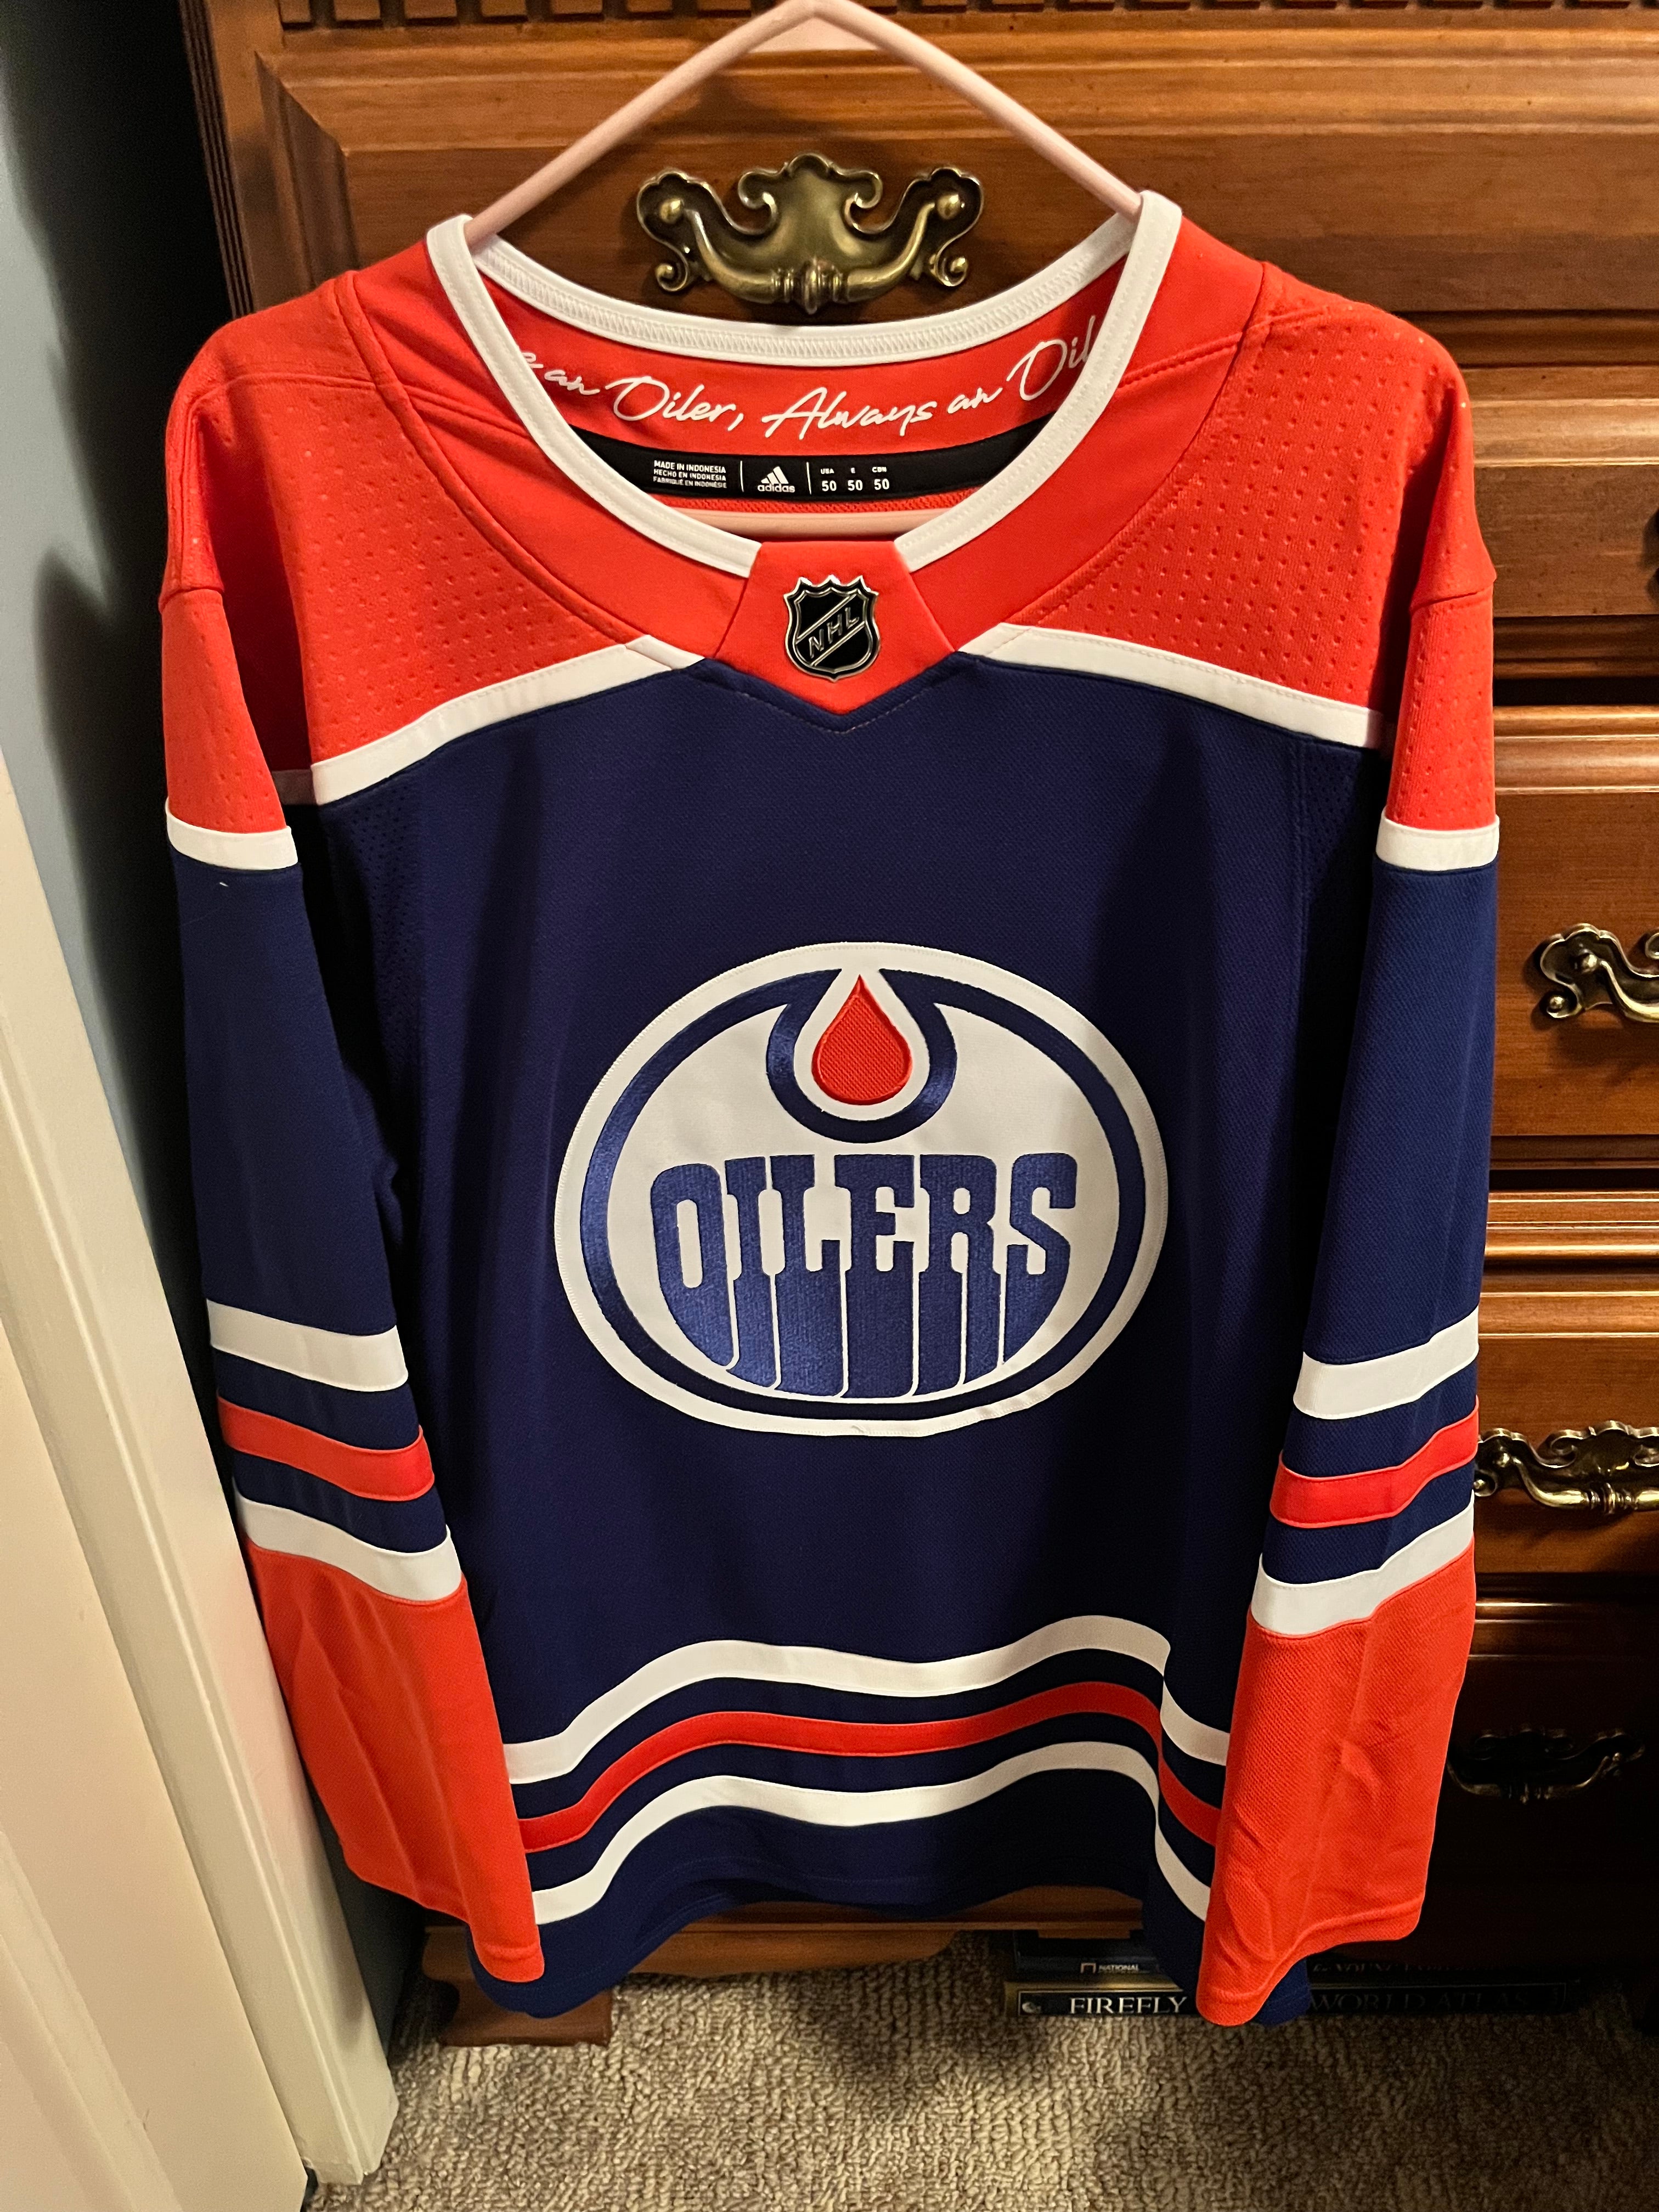 Oilers to reintroduce Oil Gear jersey for Reverse Retro series: report